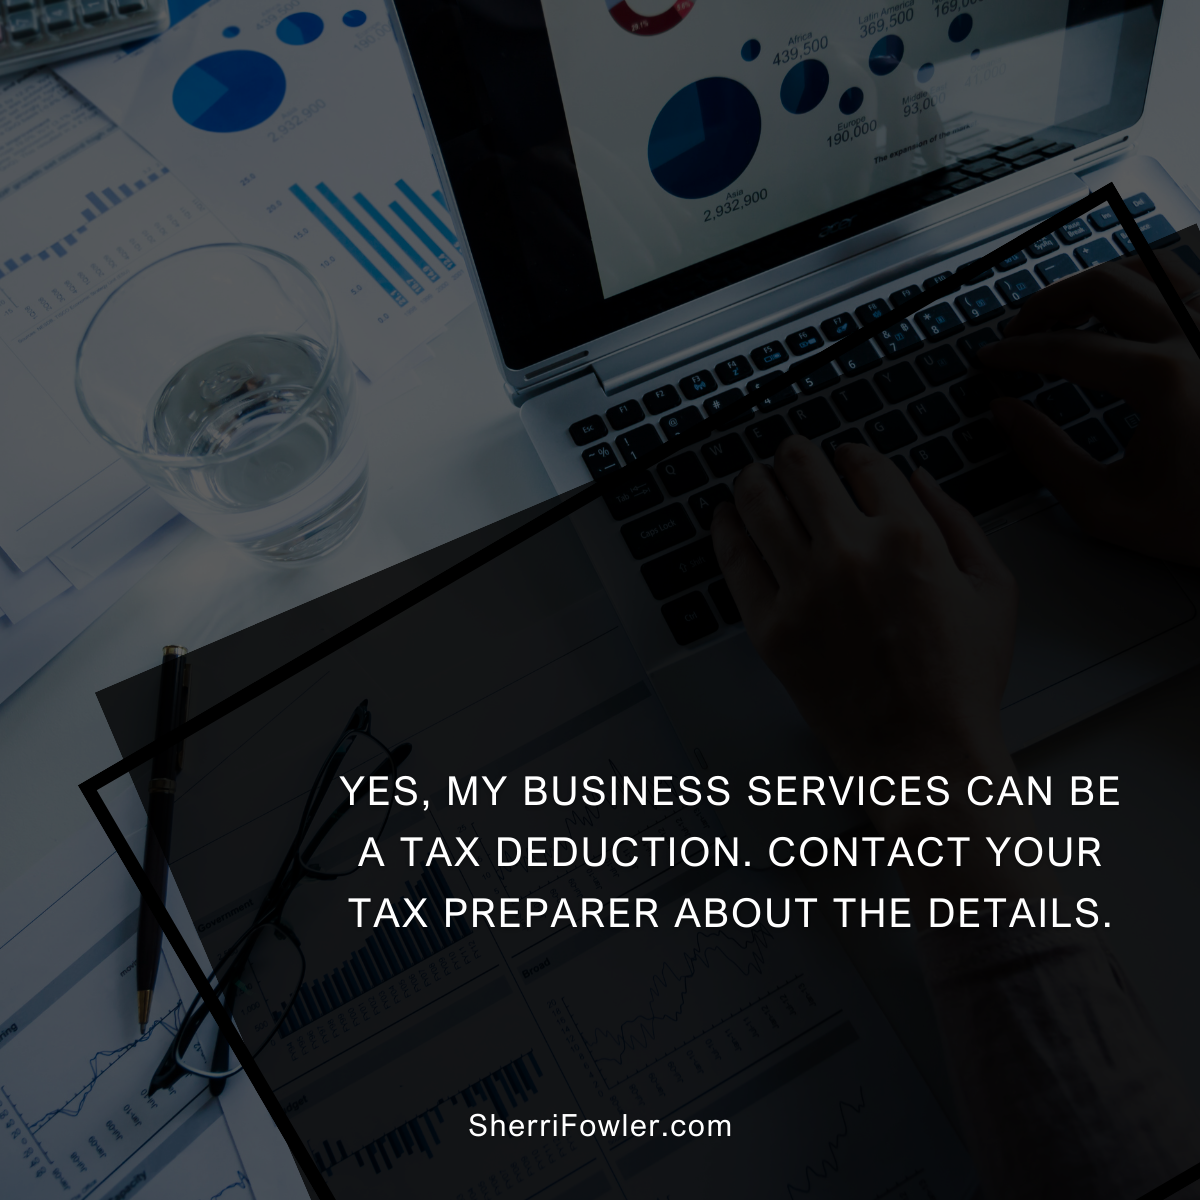 Sherri Fowler-Smith provides small business service and workshops to small business owners nationwide that are a deductible expense. contact your tax preparer about the details.